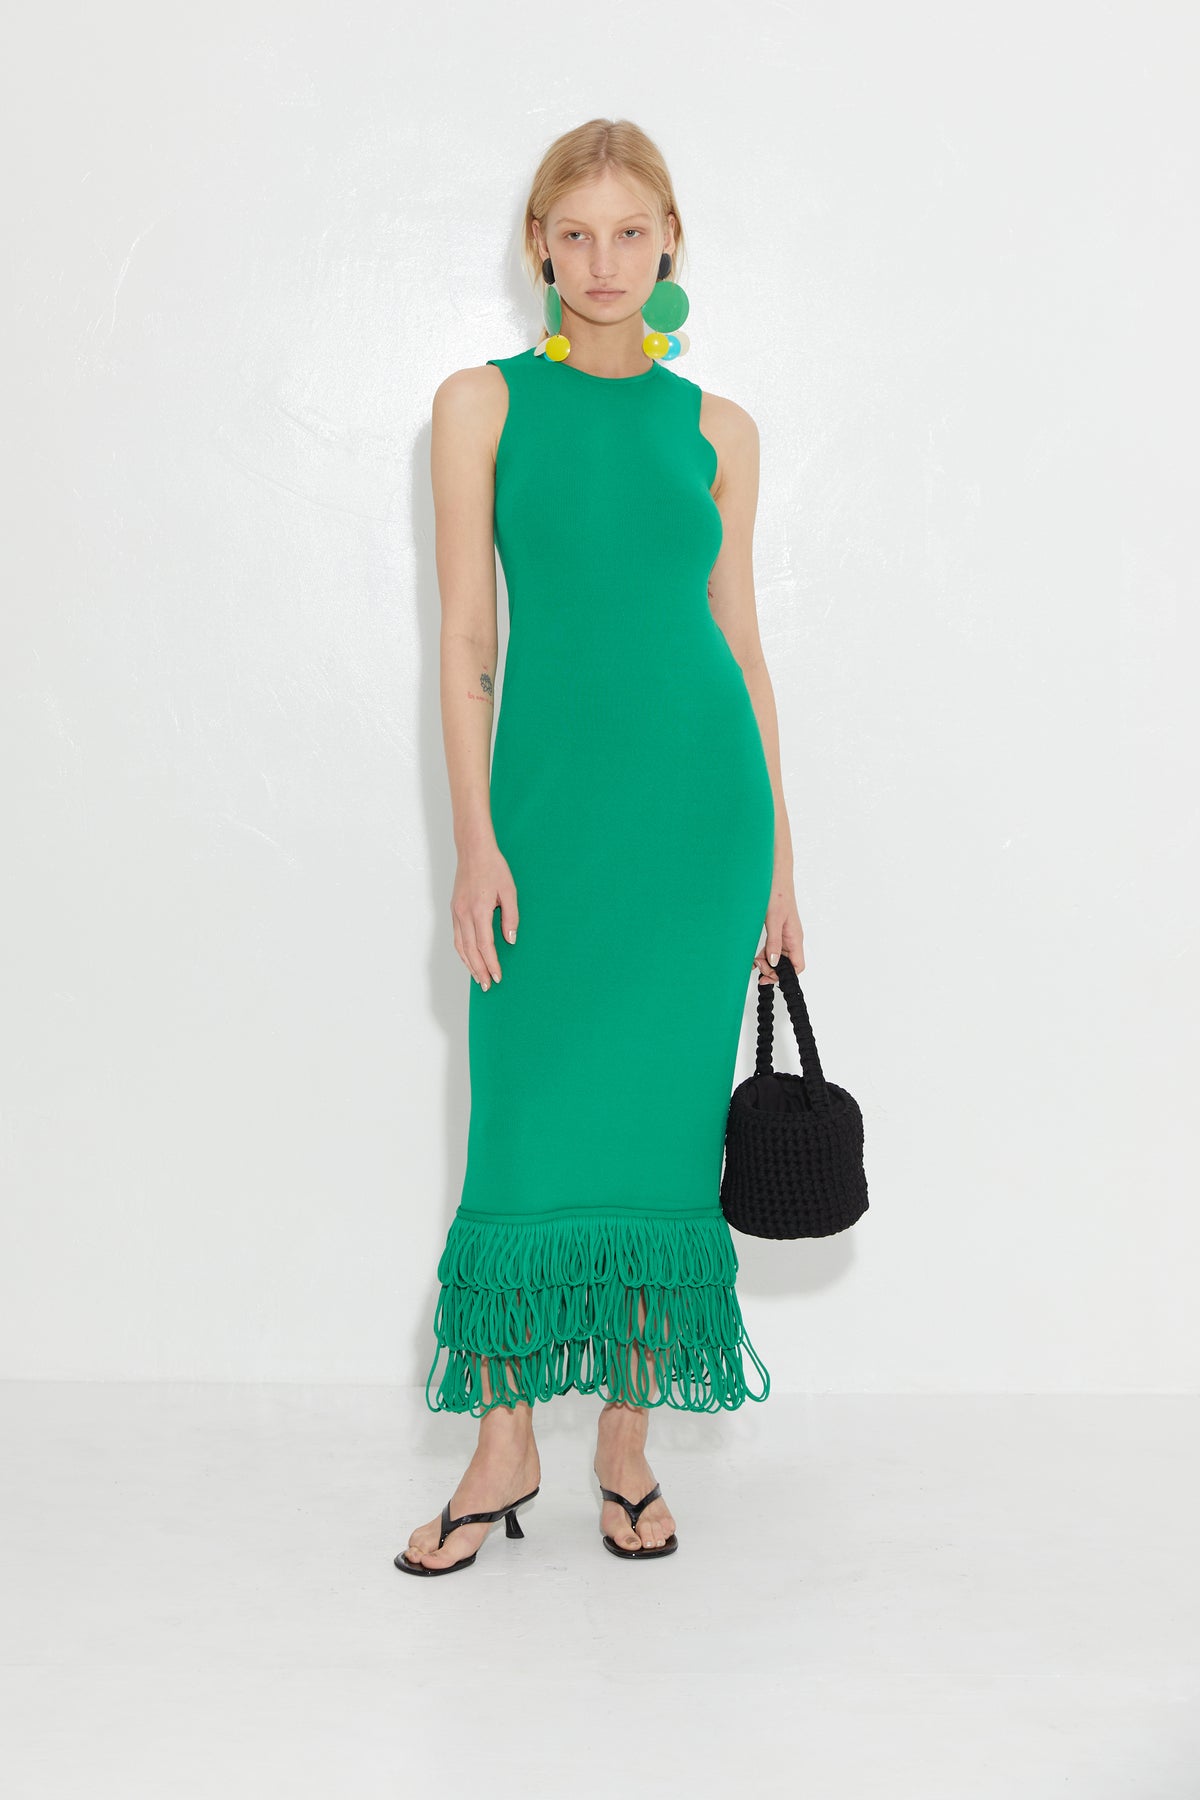 Knits By Albers Dress in Gummy Green